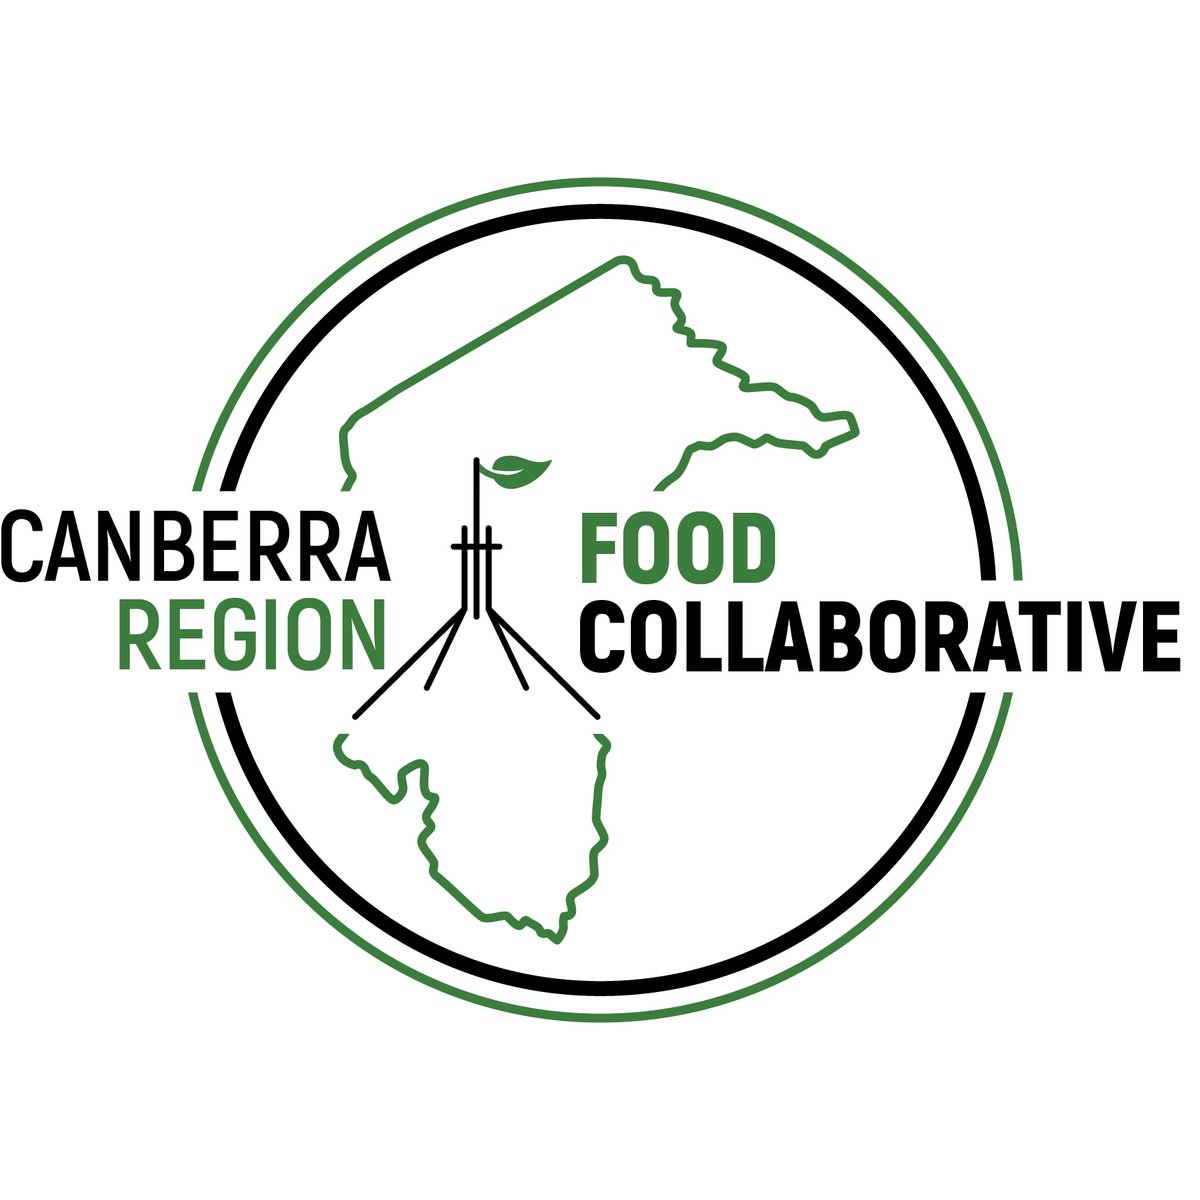 Ever wondered what a complete city-region food system would look like in Australia? Check out our CRFC website agrifood-hub.com #crfc #cityregionfoodsystems #foodsystems #sustainableliving #sustainability #food #waste #climatechange #resilience